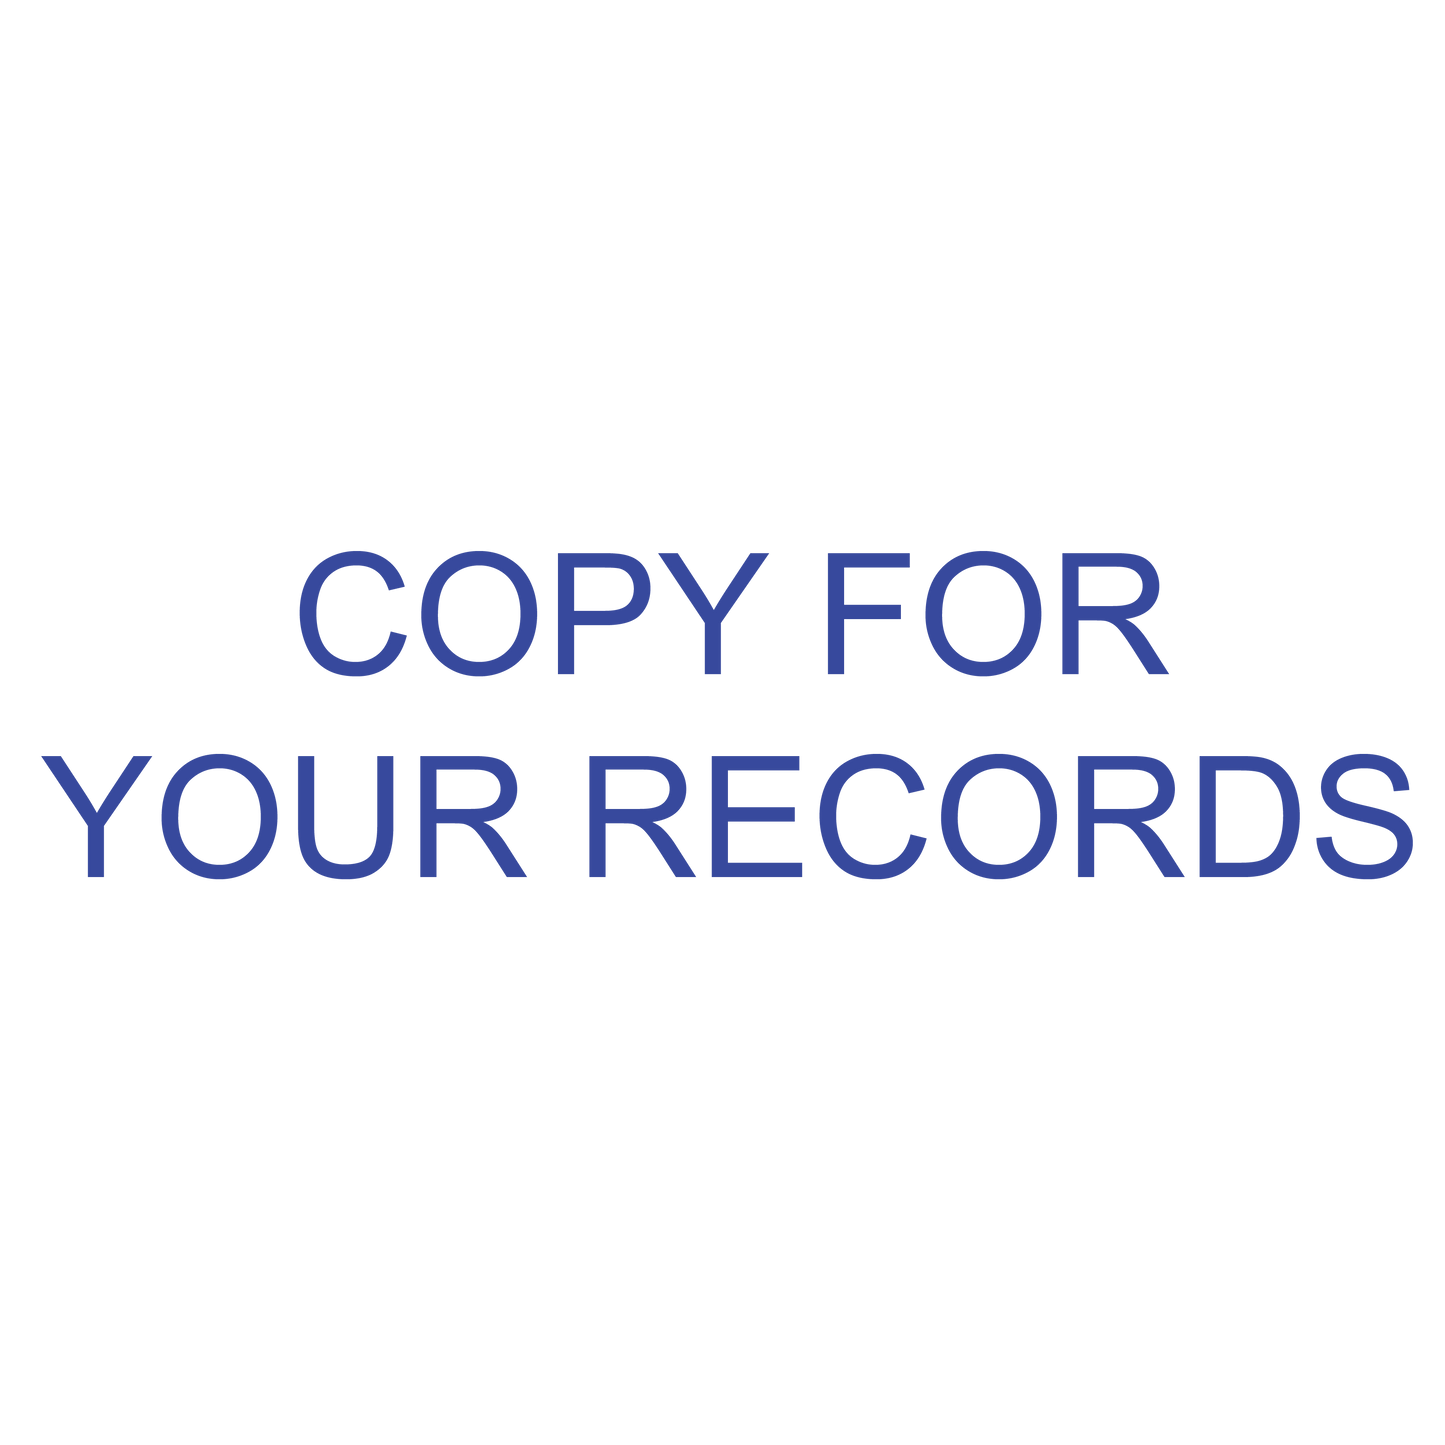 COPY FOR YOUR RECORDS Stamp